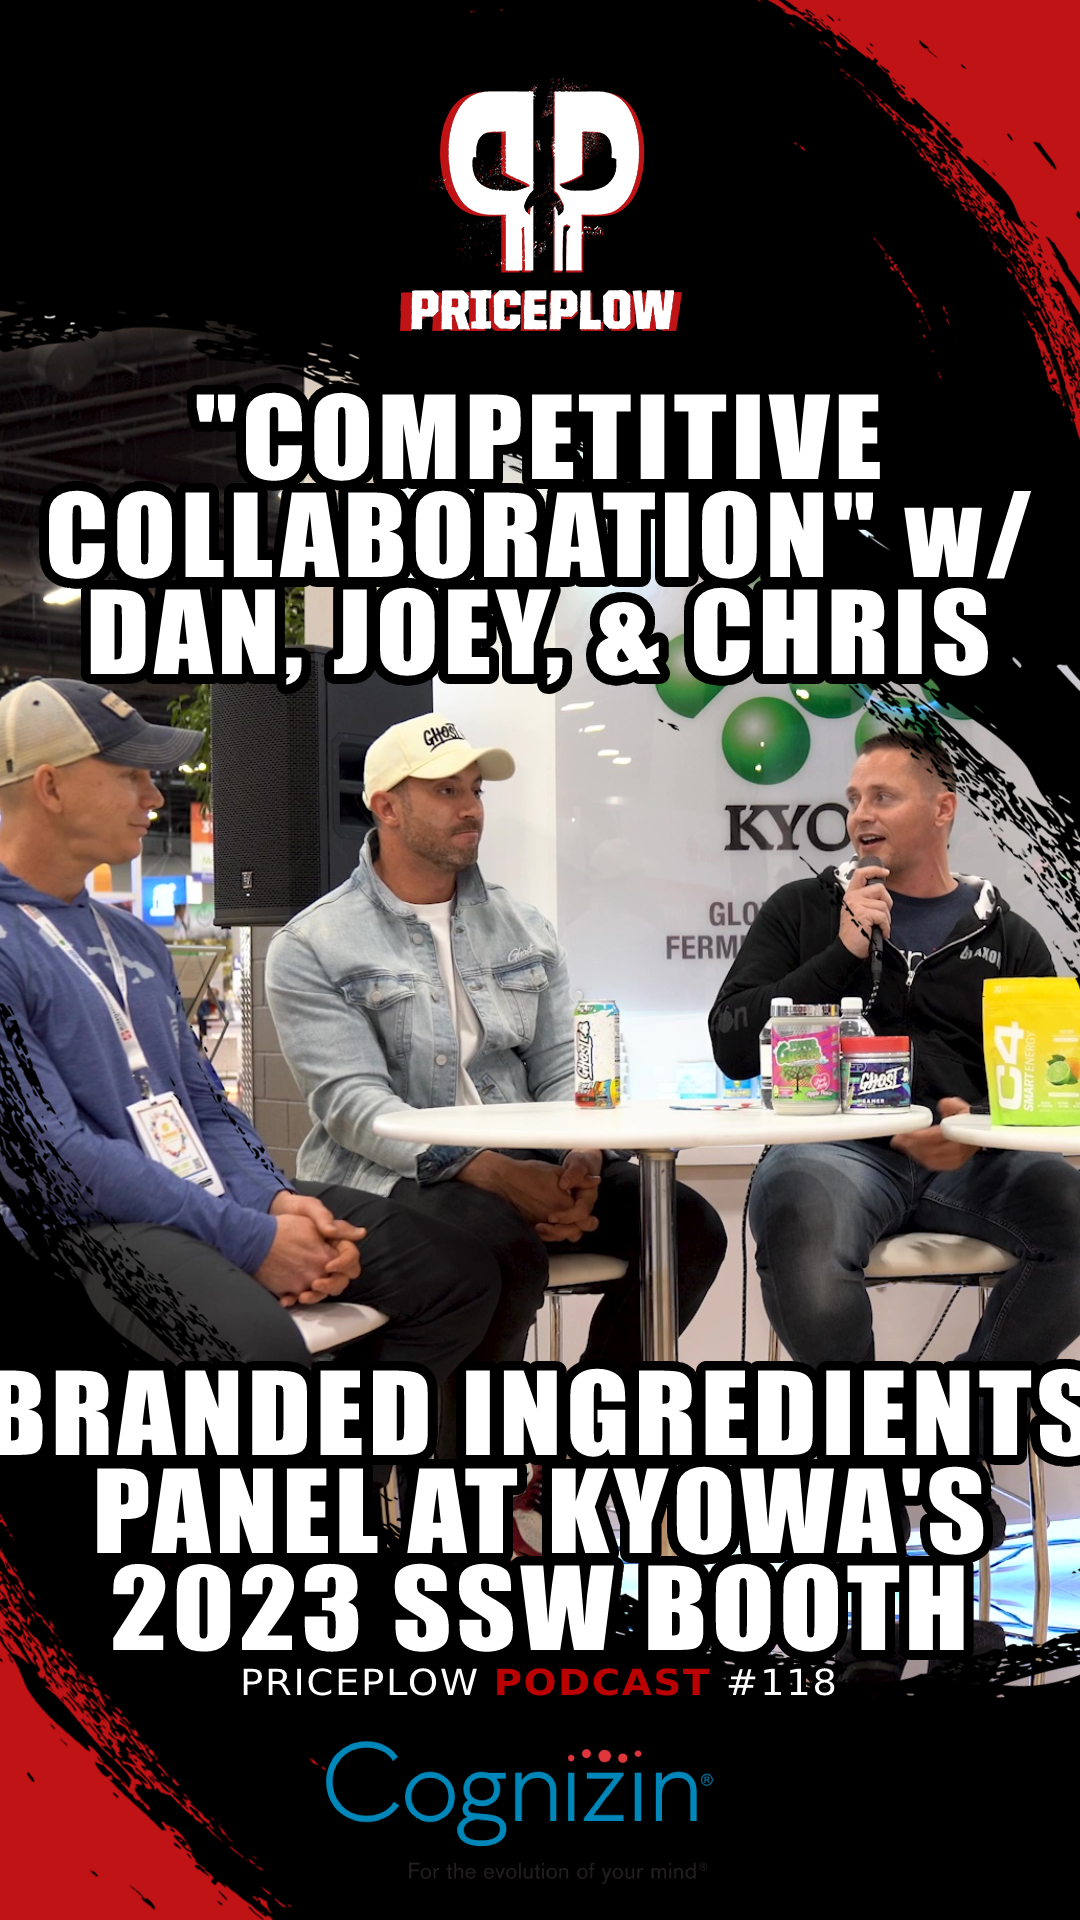 Kyowa SSW 2023 Panel: Branded Ingredients and Collaborative Competition with Dan, Joey, and Chris of Ghost, Glaxon, and Nutrabolt